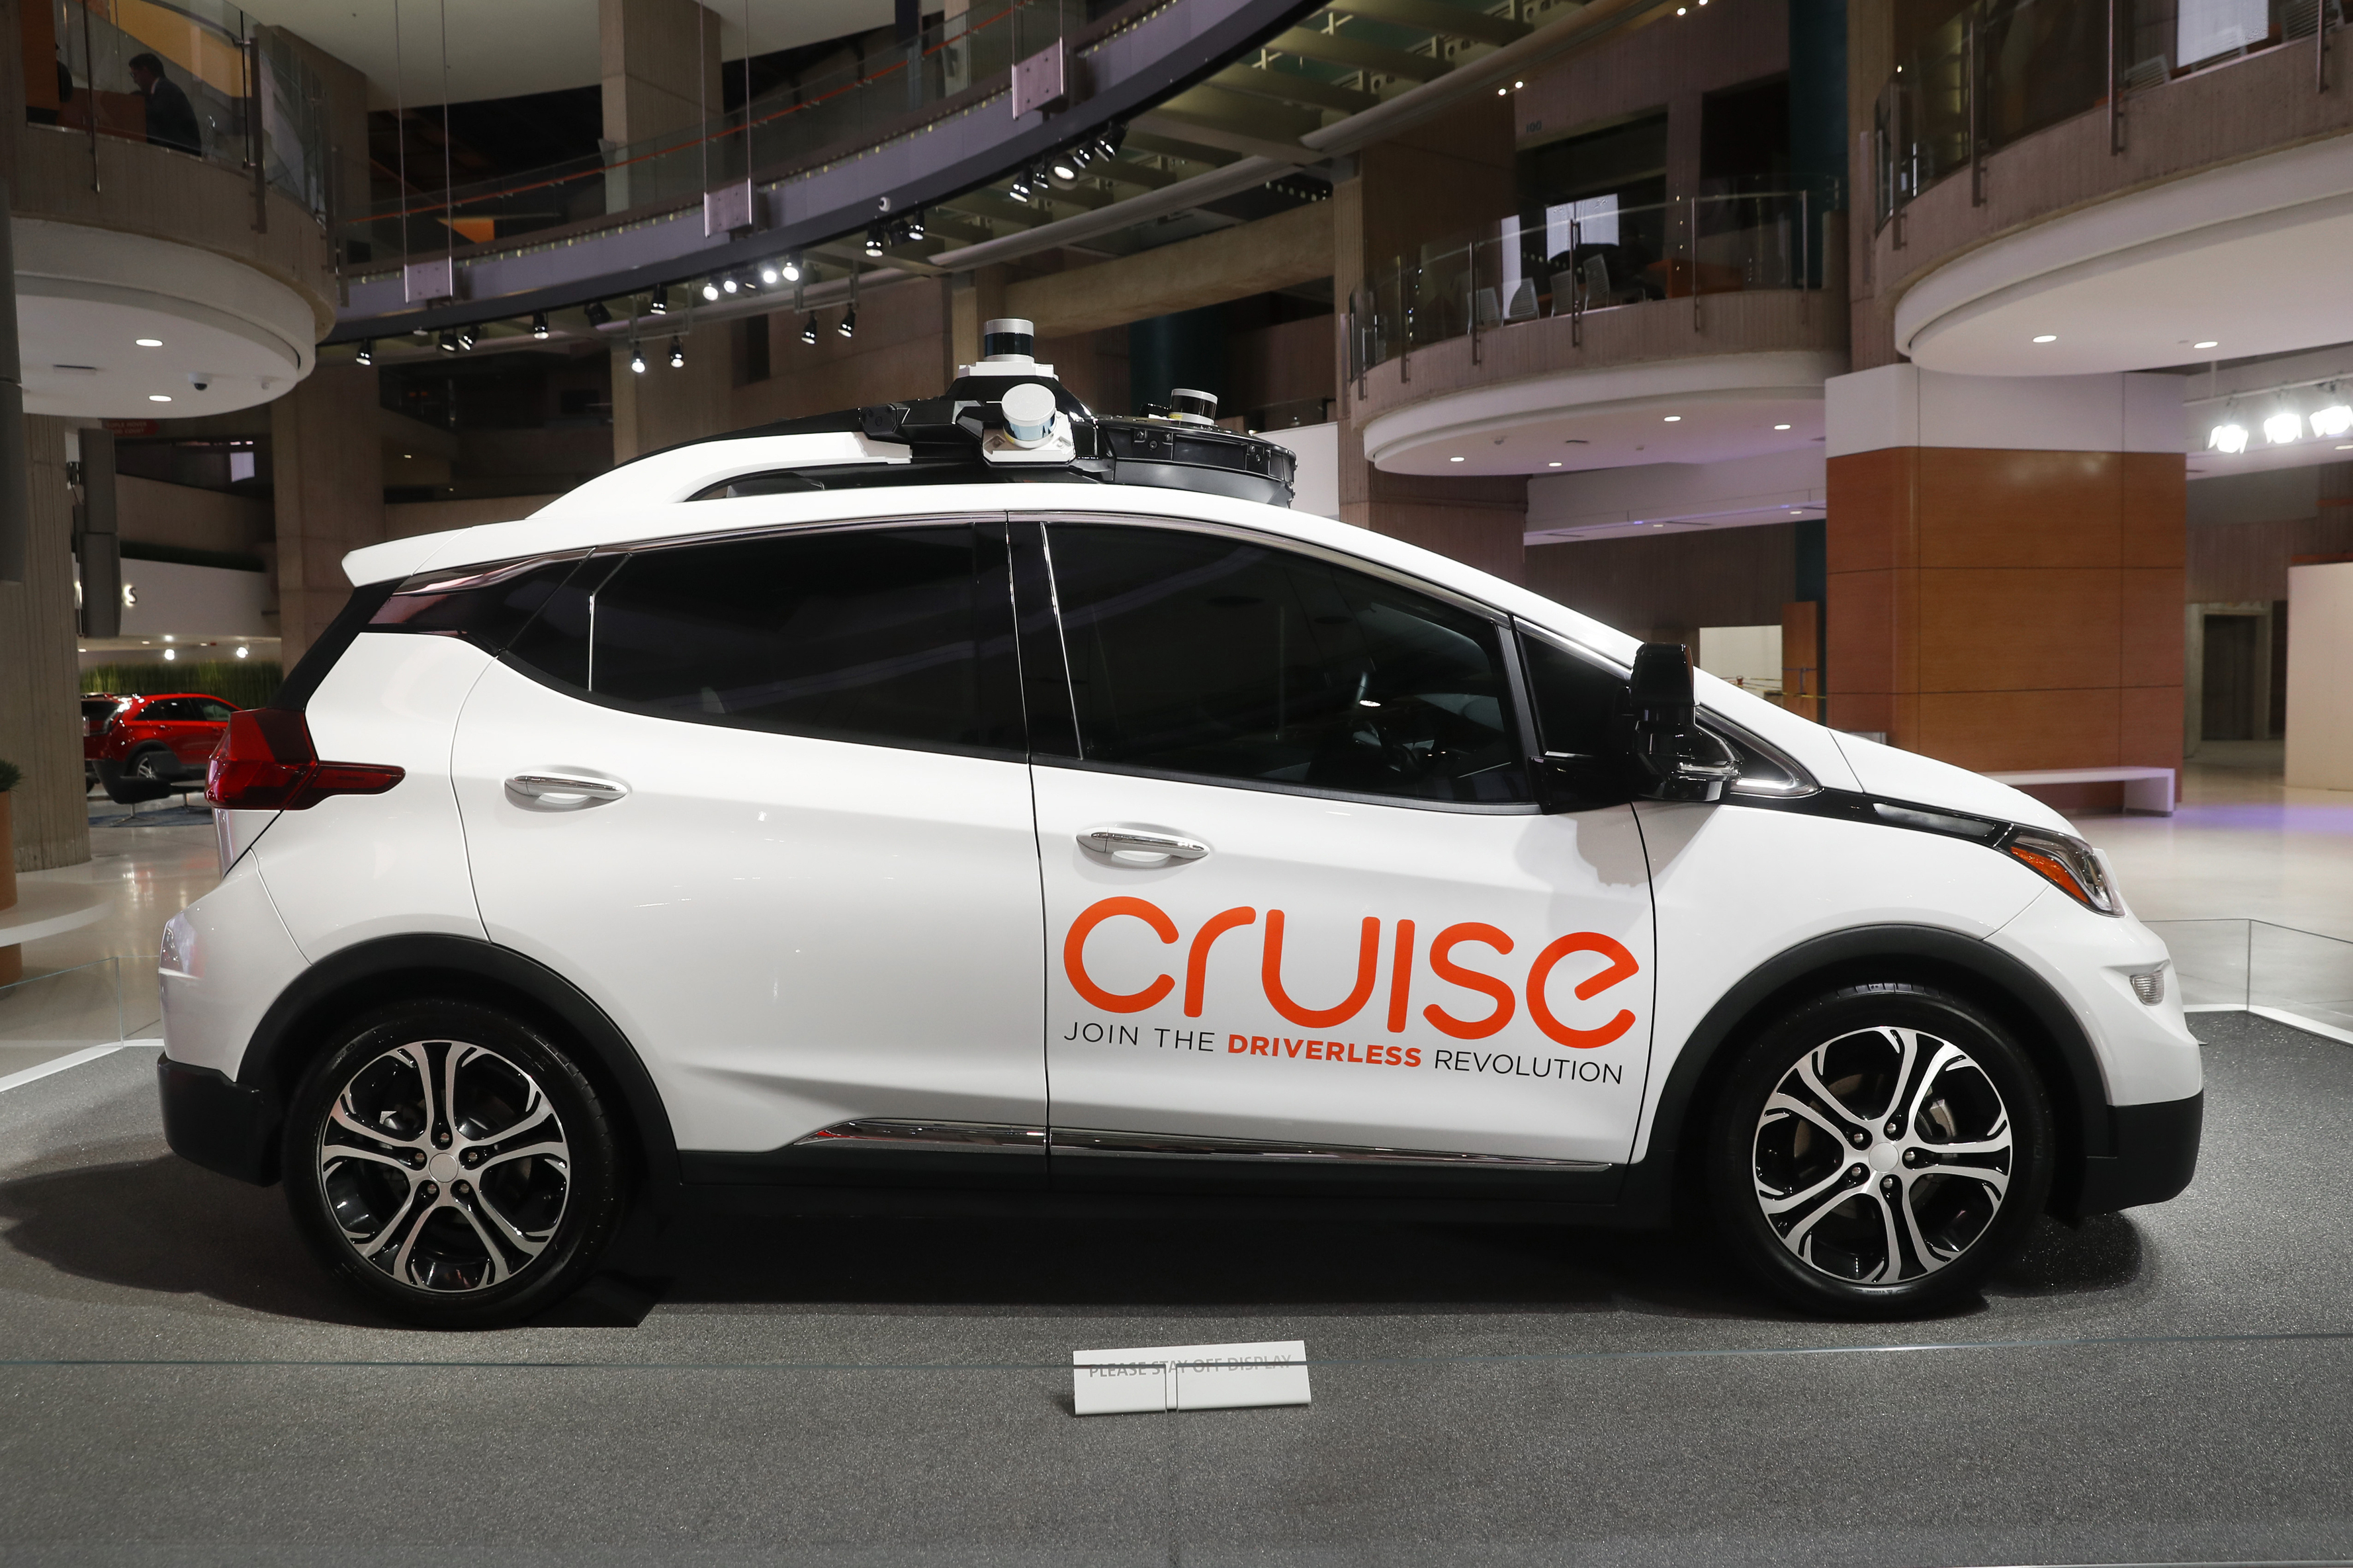 GM’s Cruise Autonomous Vehicle Unit Agrees to Cut Fleet  After Two Crashes in San Francisco